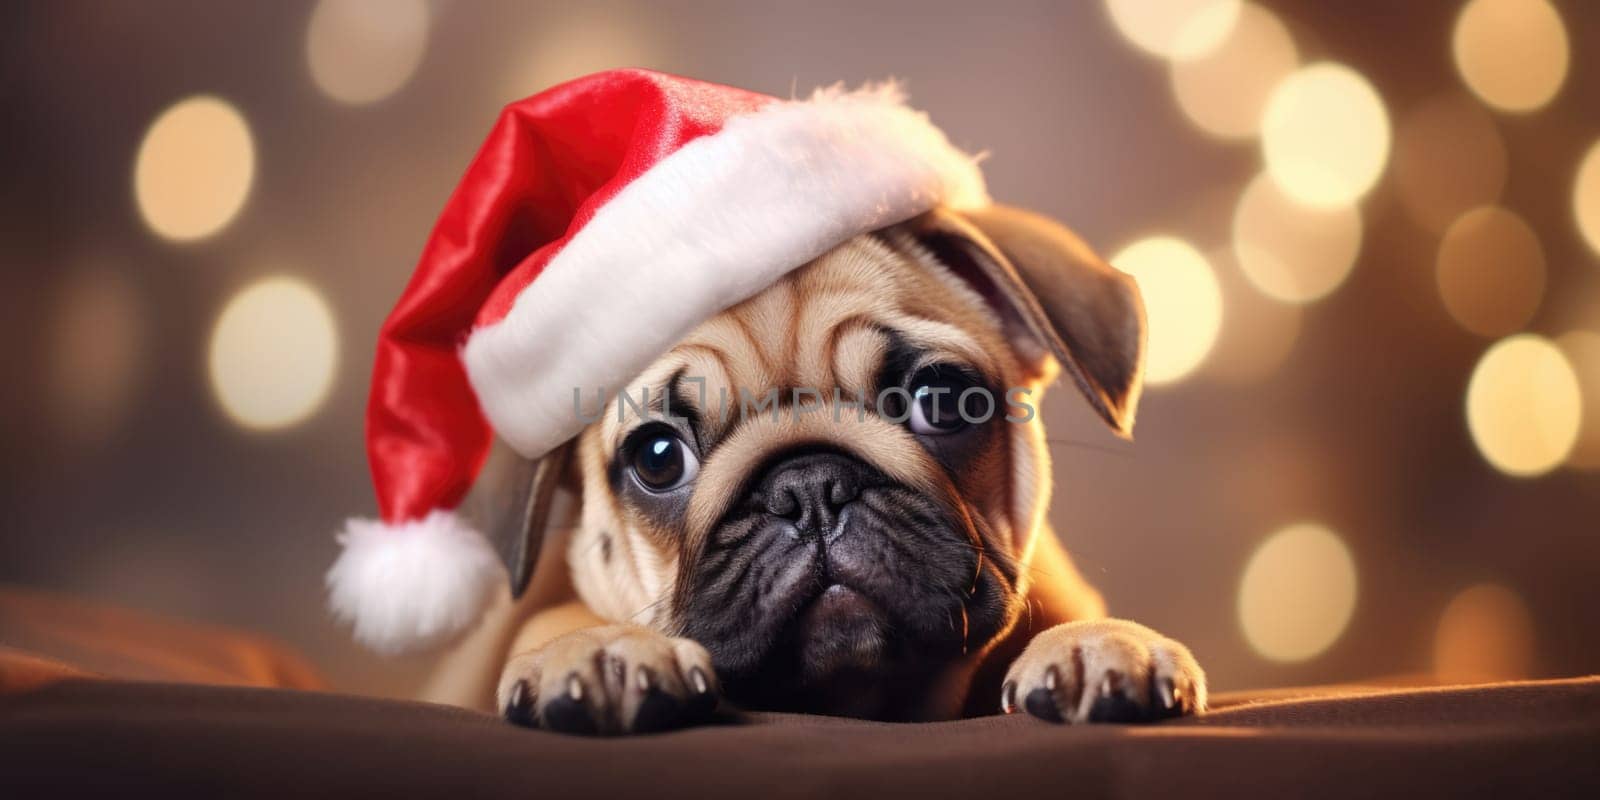 Adorable dog wearing Santa hats at room decorated for Christmas . Cute pets comeliness by biancoblue